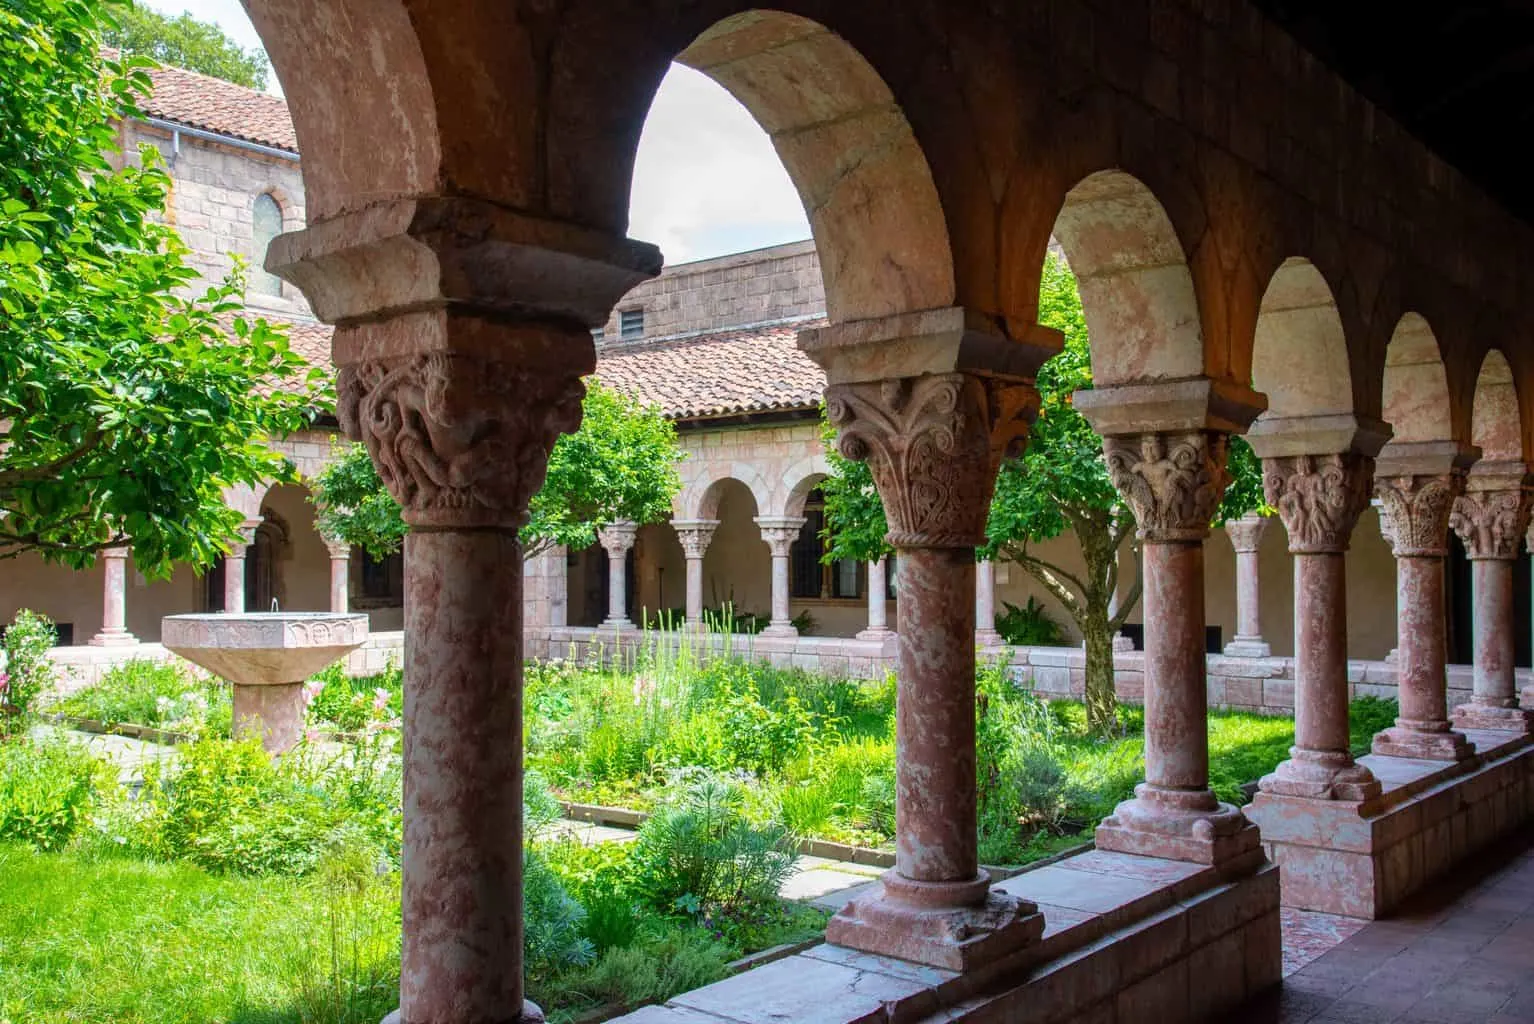 The beautiful European and medieval cloister in Washington Heights, NYC.